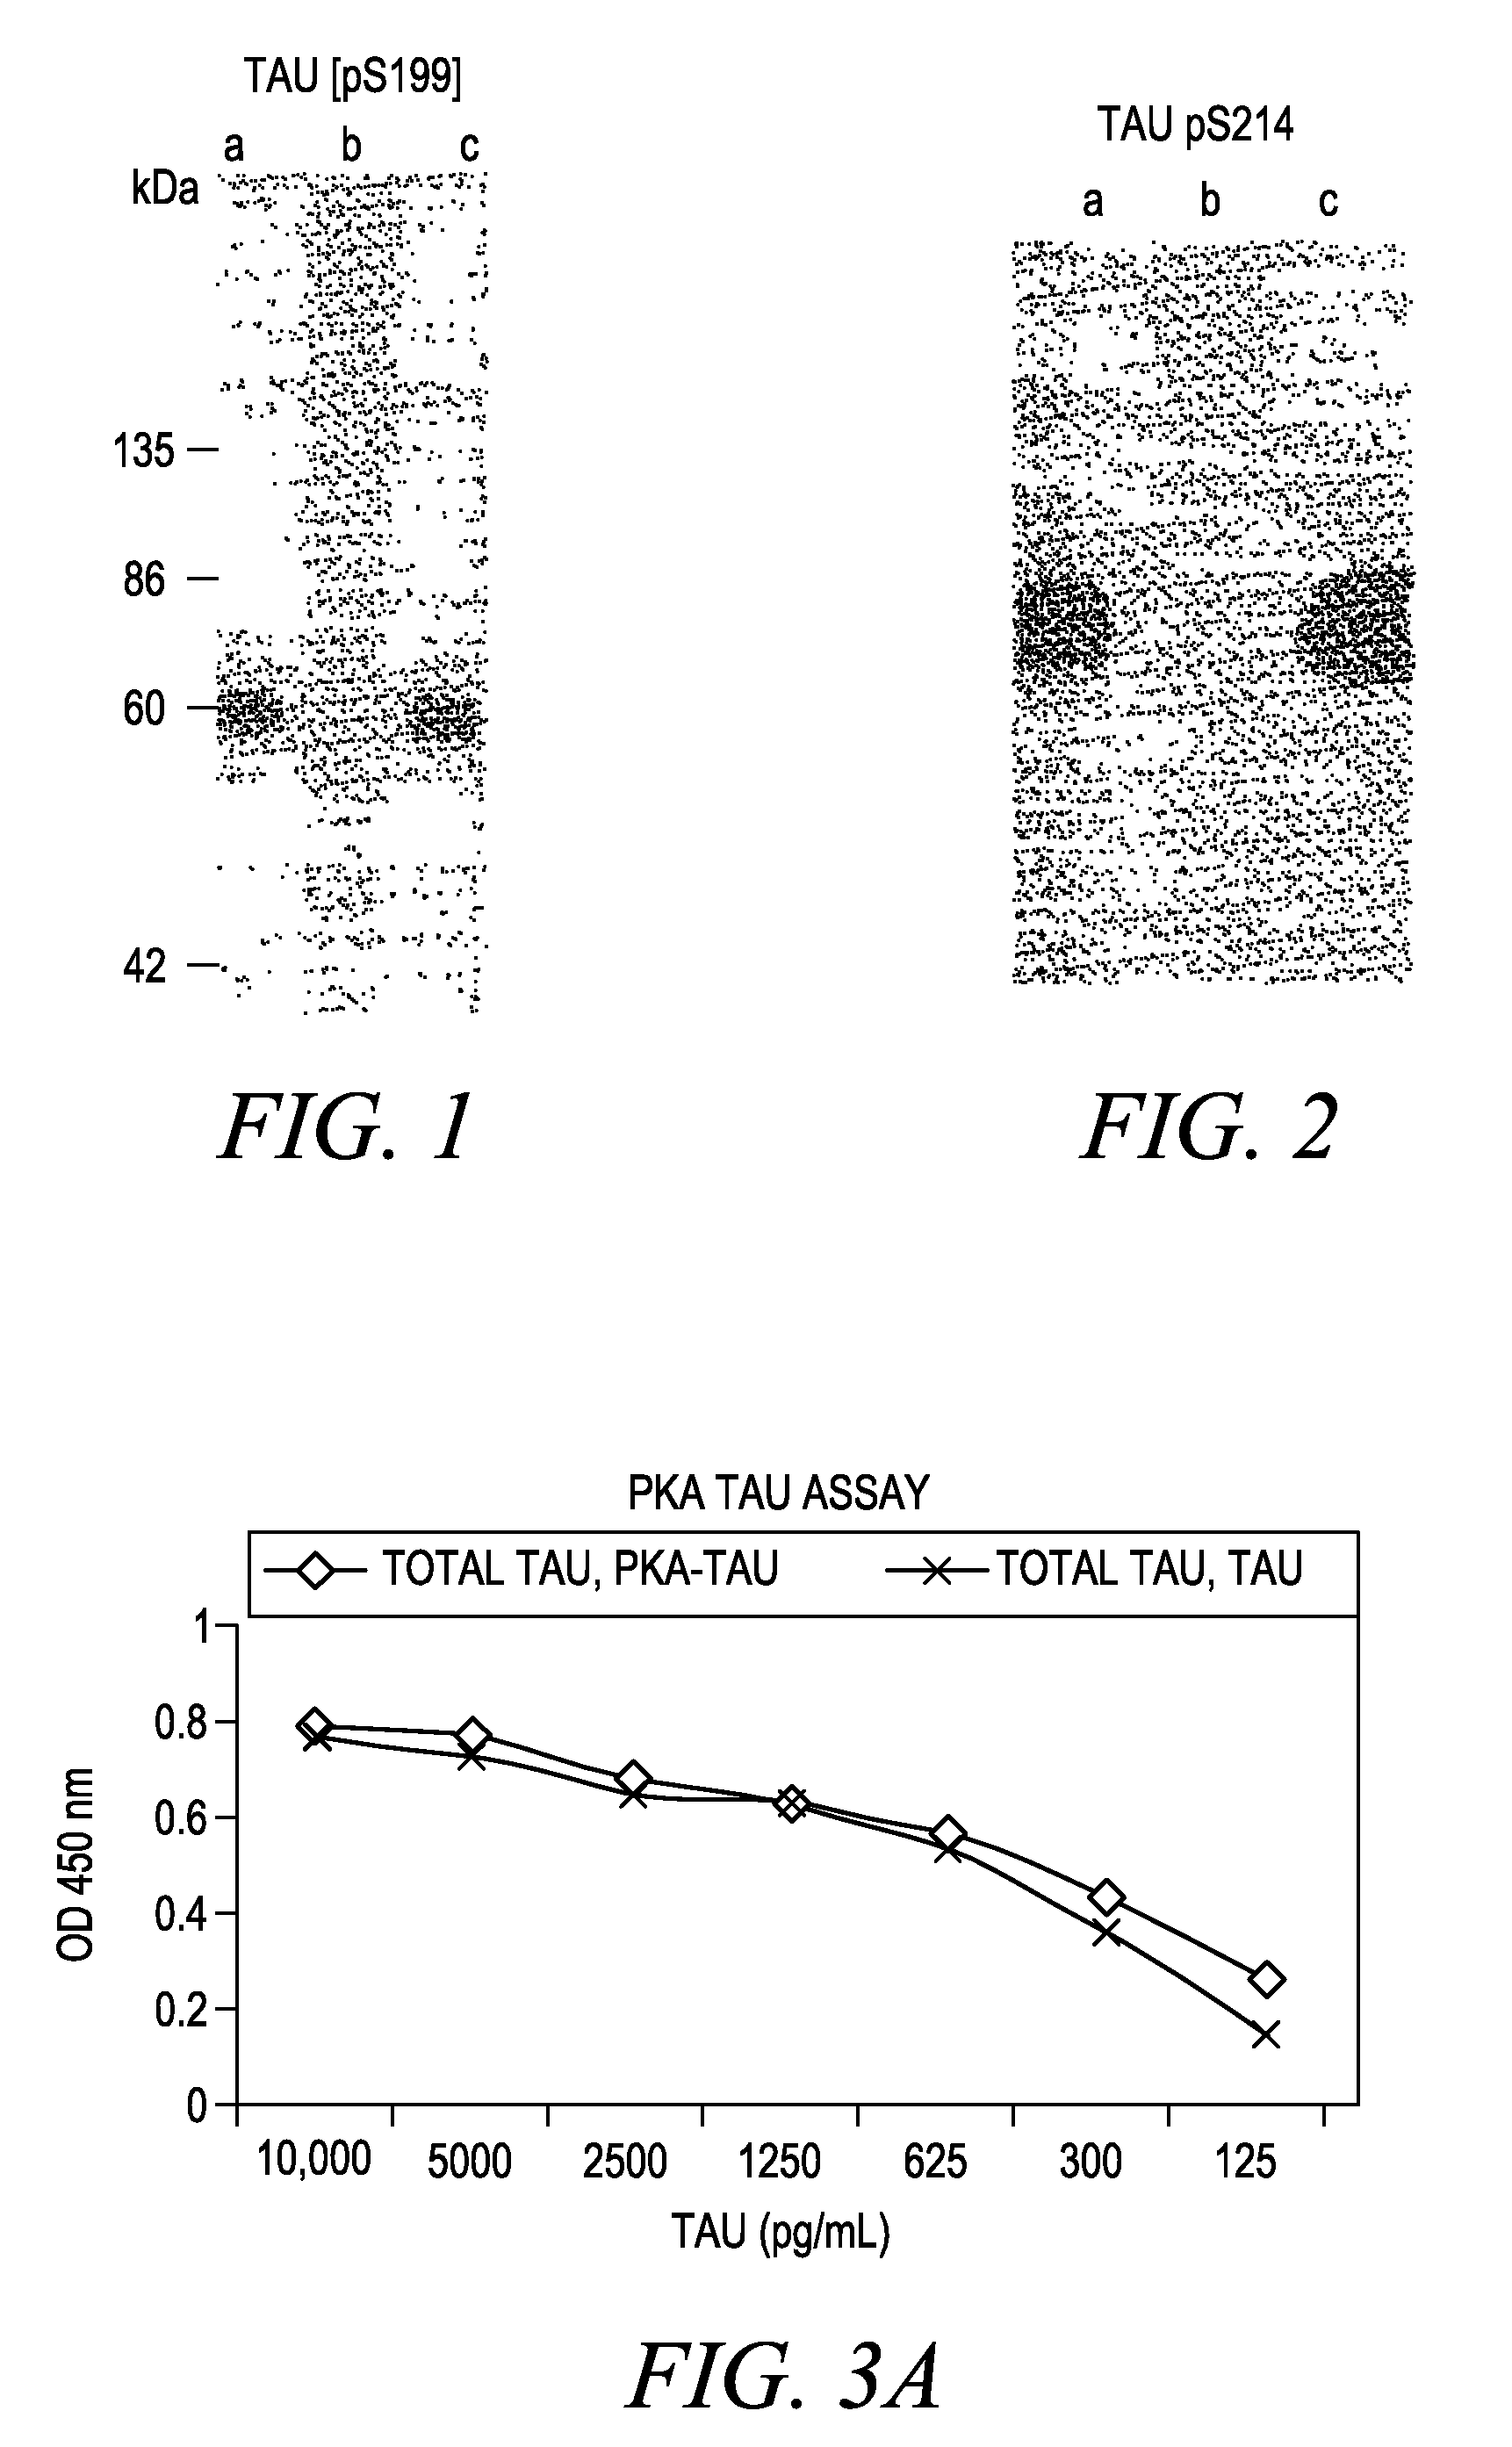 Method for quantifying phosphokinase activity on proteins